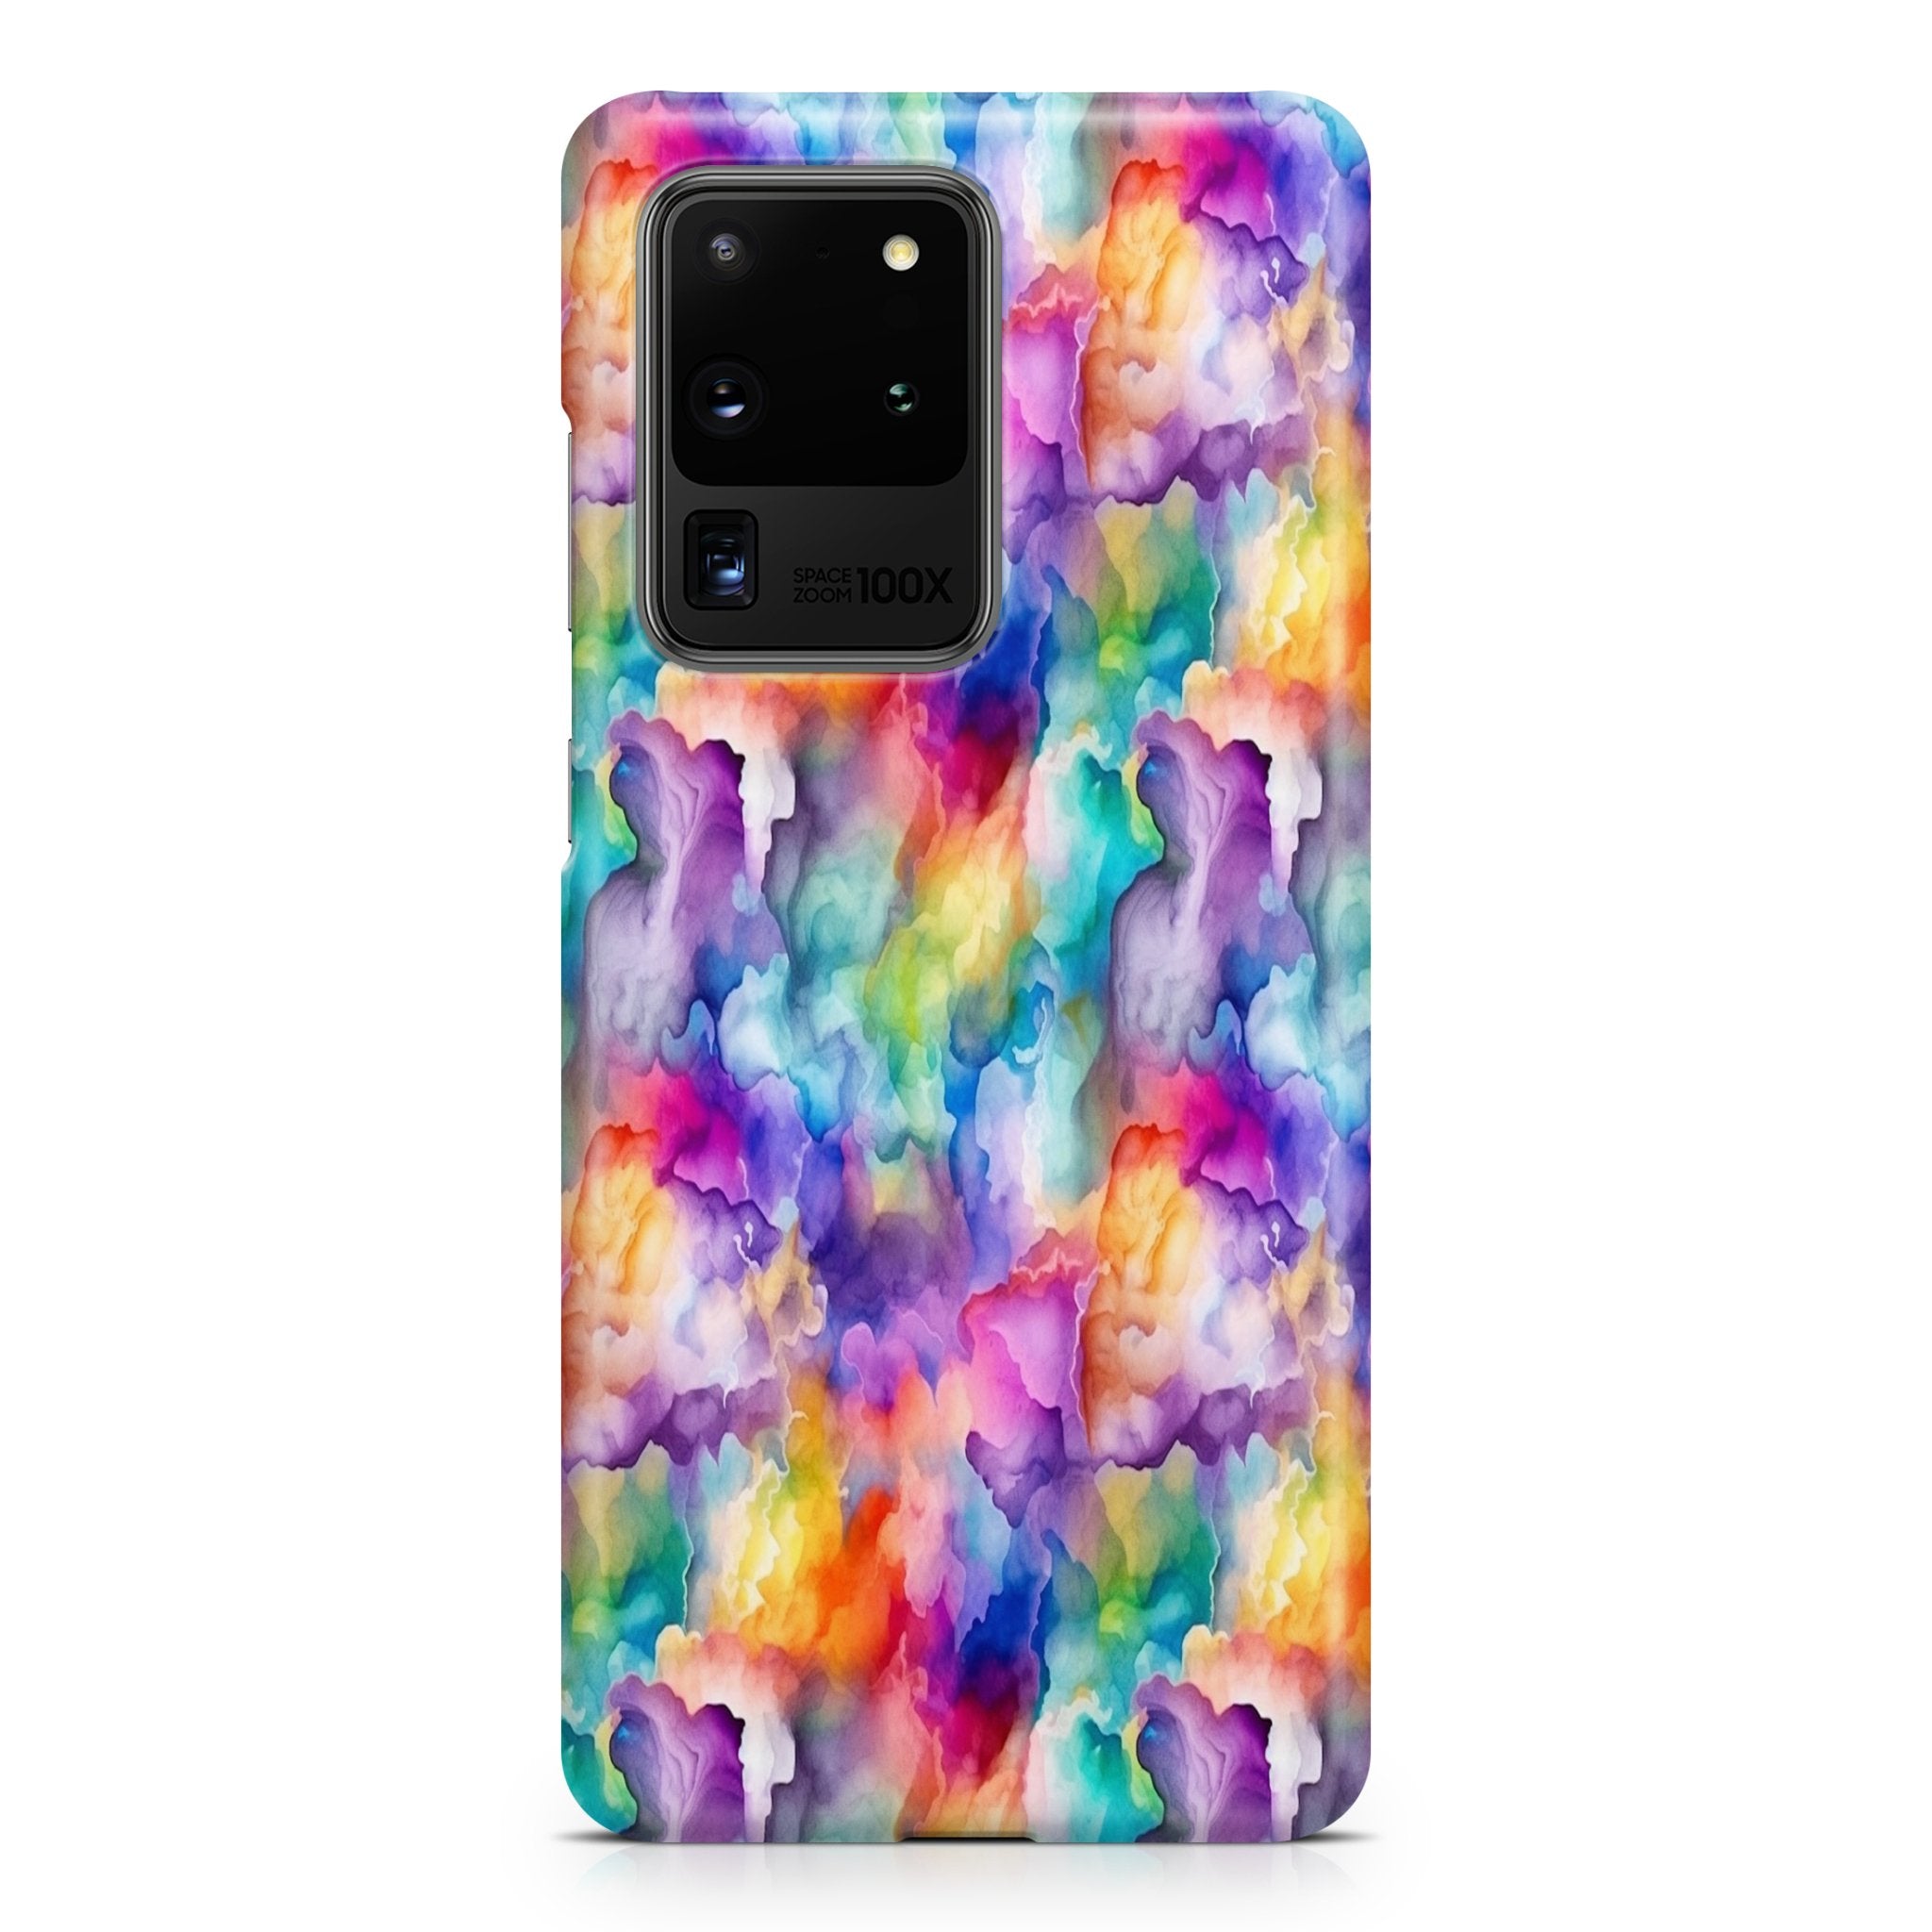 Chromatic Nimbus - Samsung phone case designs by CaseSwagger